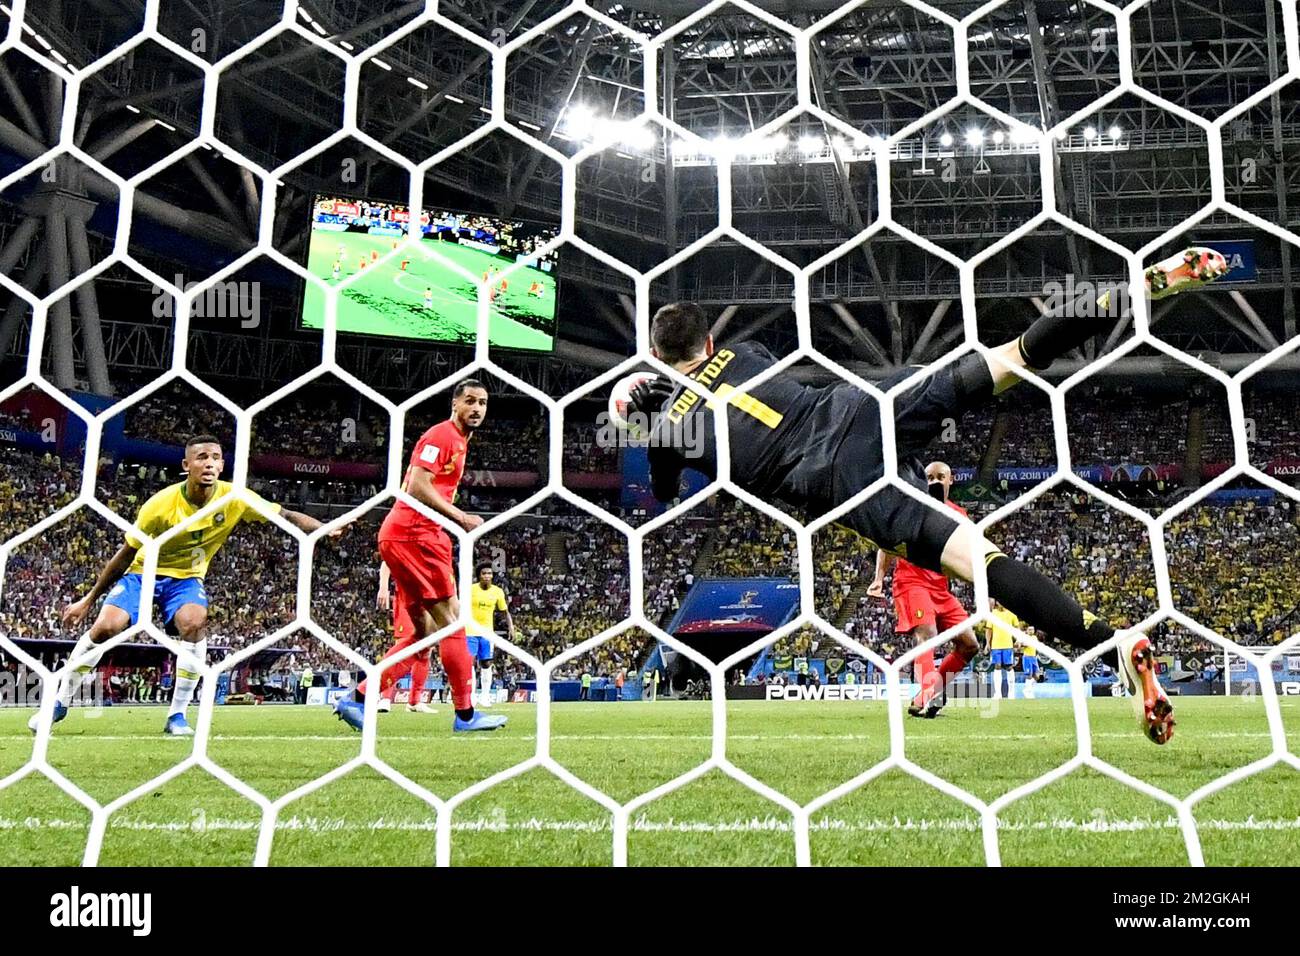 Belgium's goalkeeper Thibaut Courtois pictured during a soccer game between Belgian national soccer team the Red Devils and Brazil in Kazan, Russia, Friday 06 July 2018, the quarter-finals of the 2018 FIFA World Cup. BELGA PHOTO DIRK WAEM Stock Photo